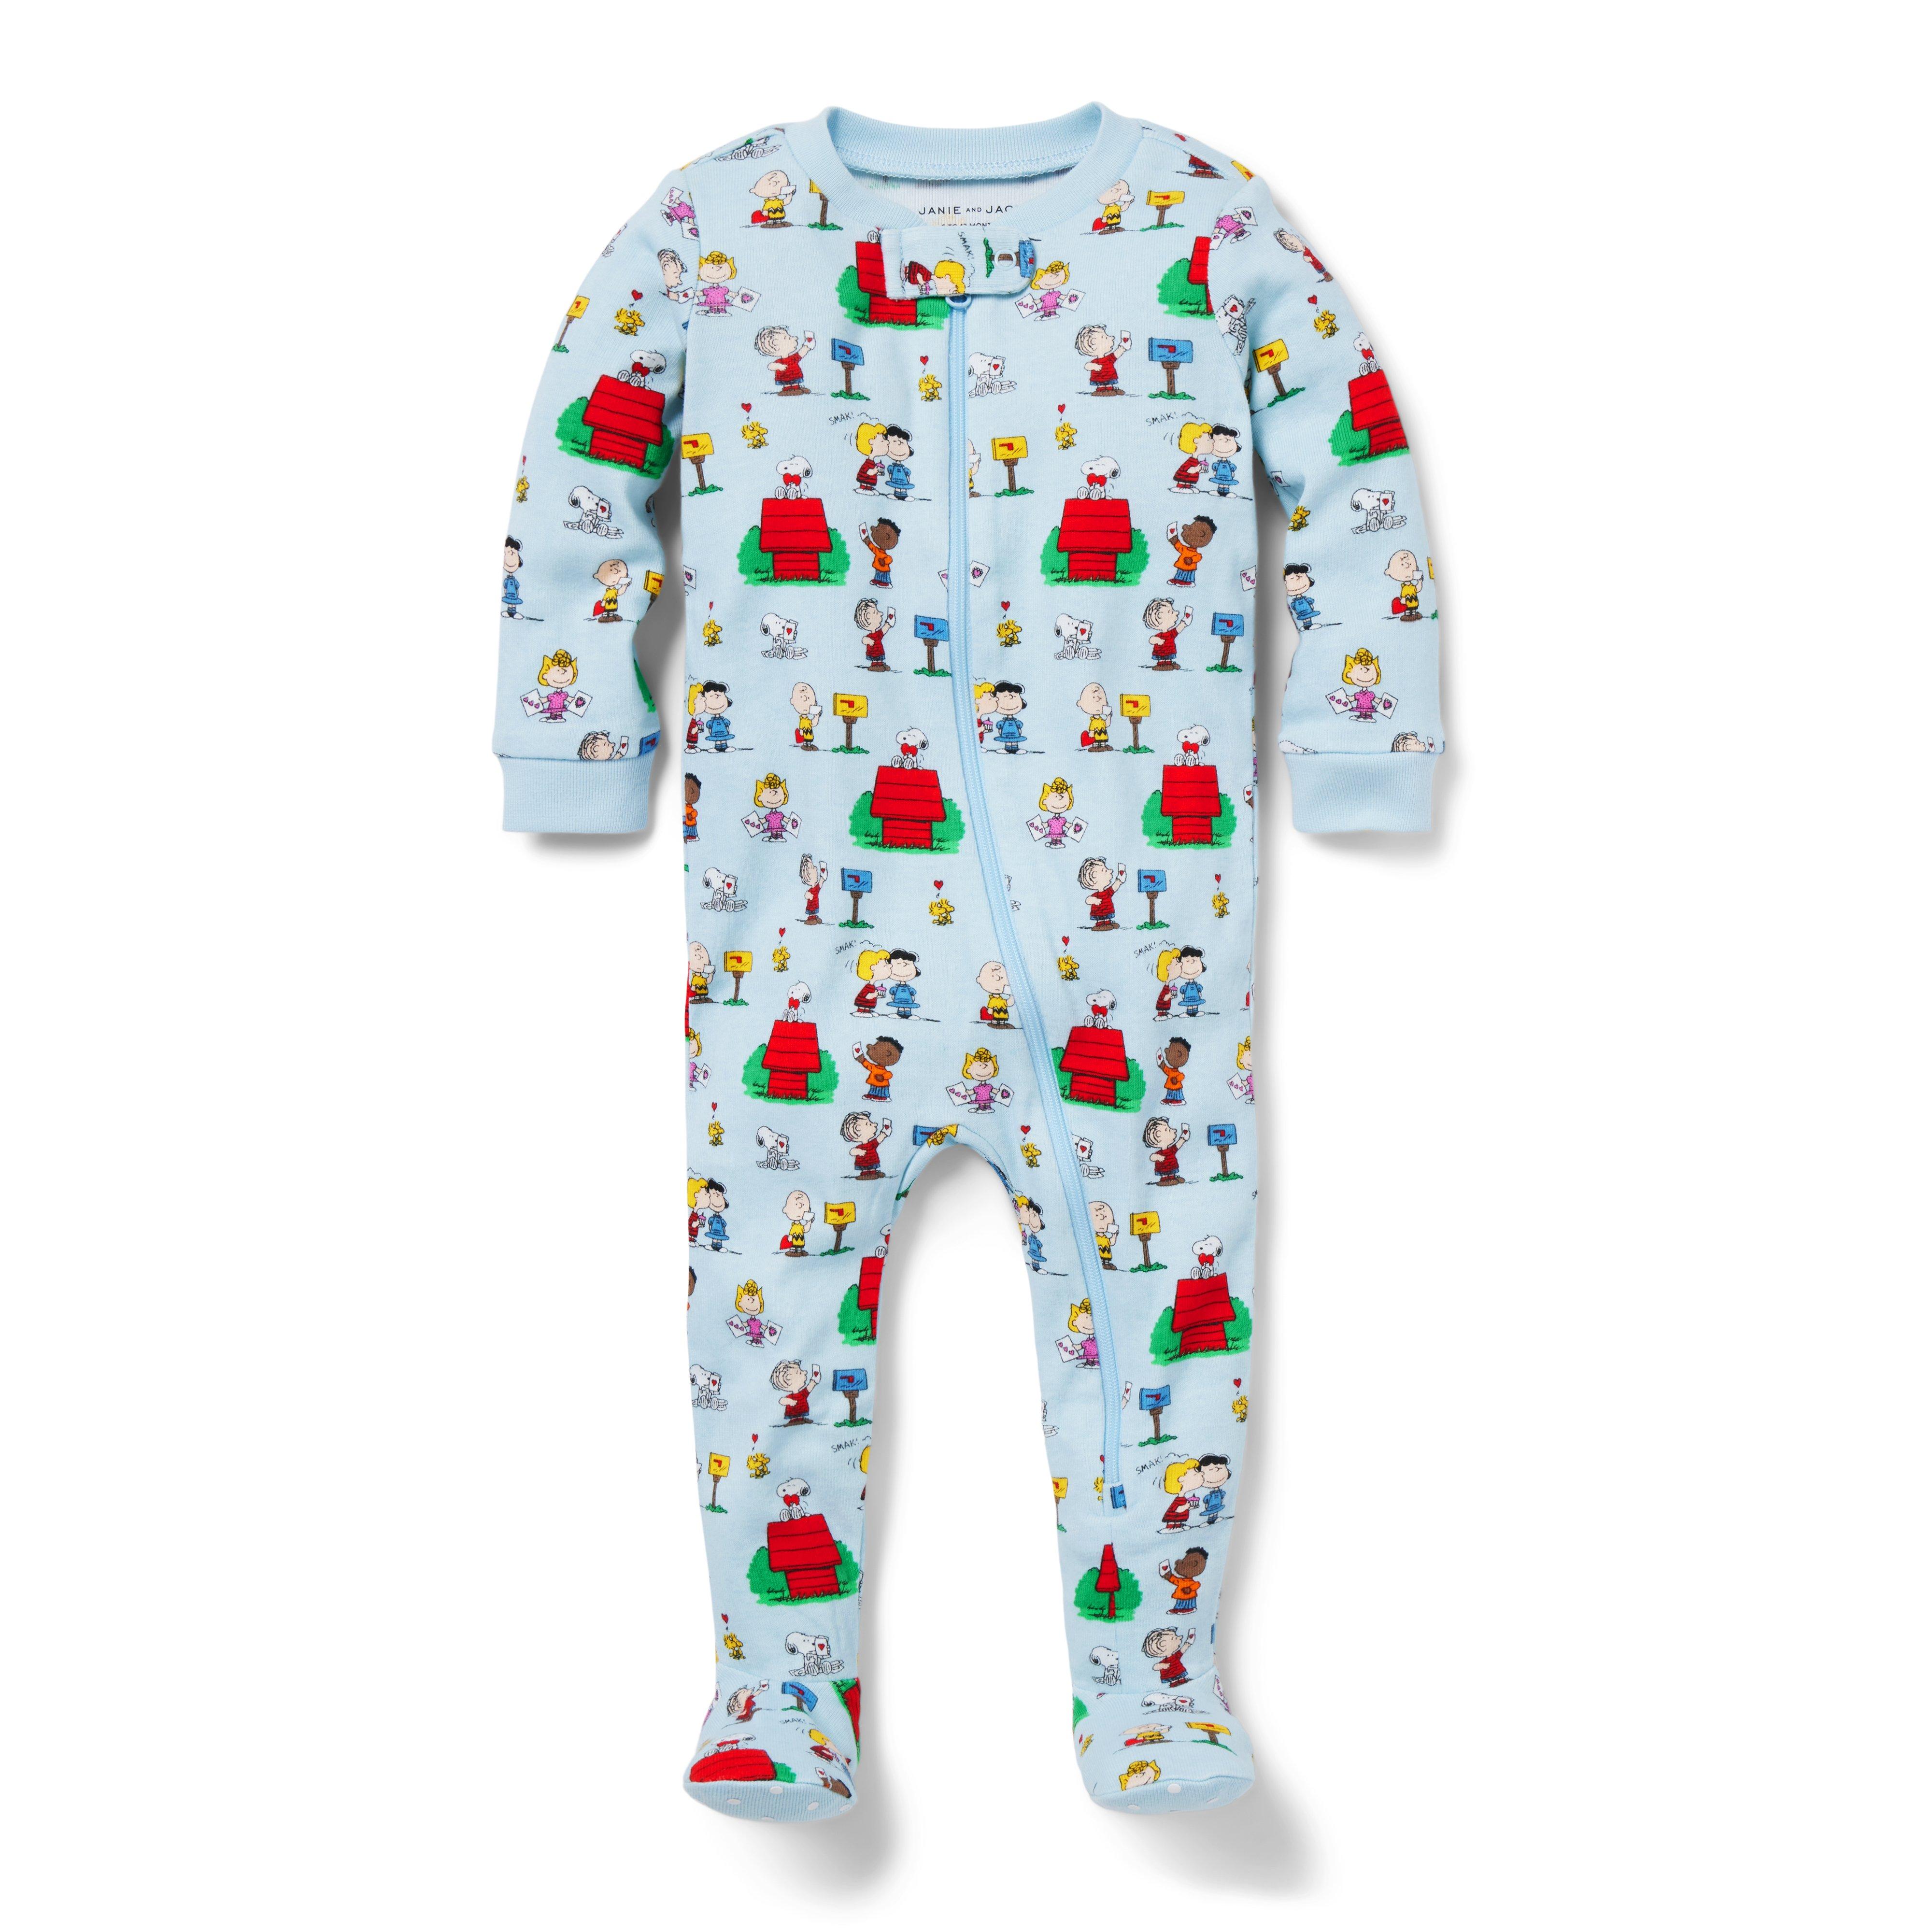 Baby Good Night Footed Pajamas in PEANUTS Valentine Friends